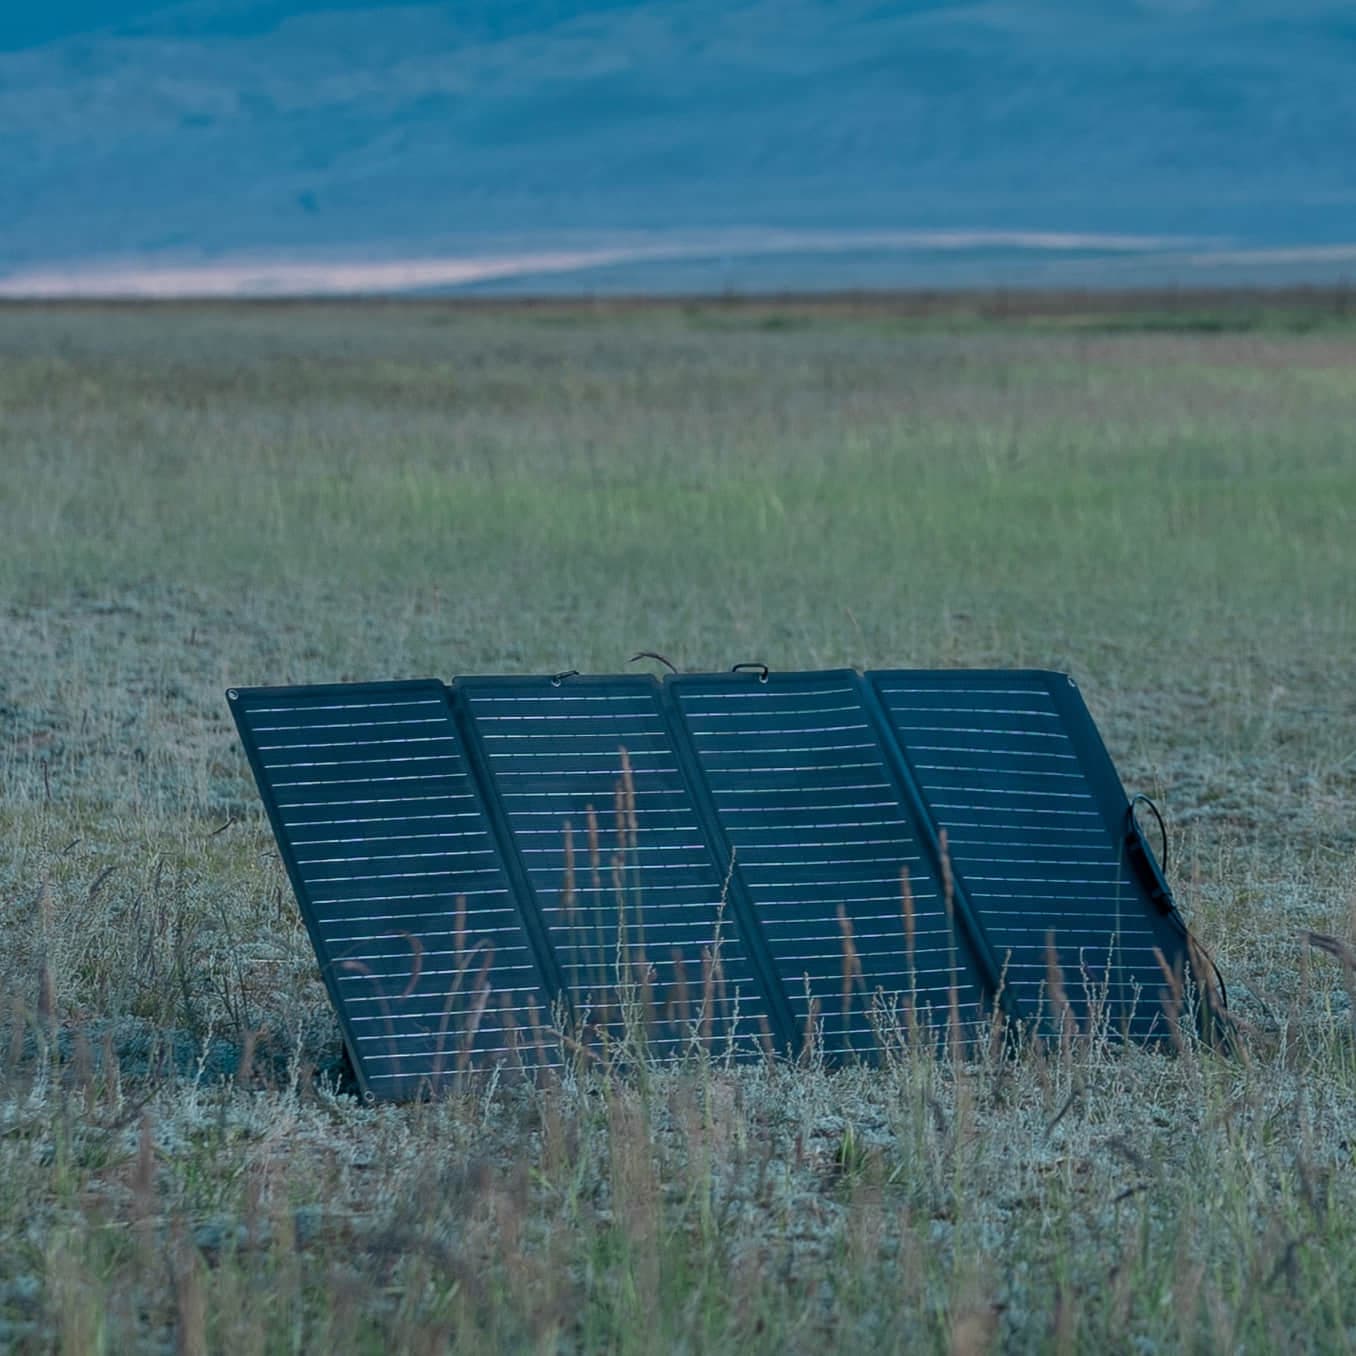 EcoFlow's portable solar panel, the 160W Monocrystalline, shines in the middle of a field.